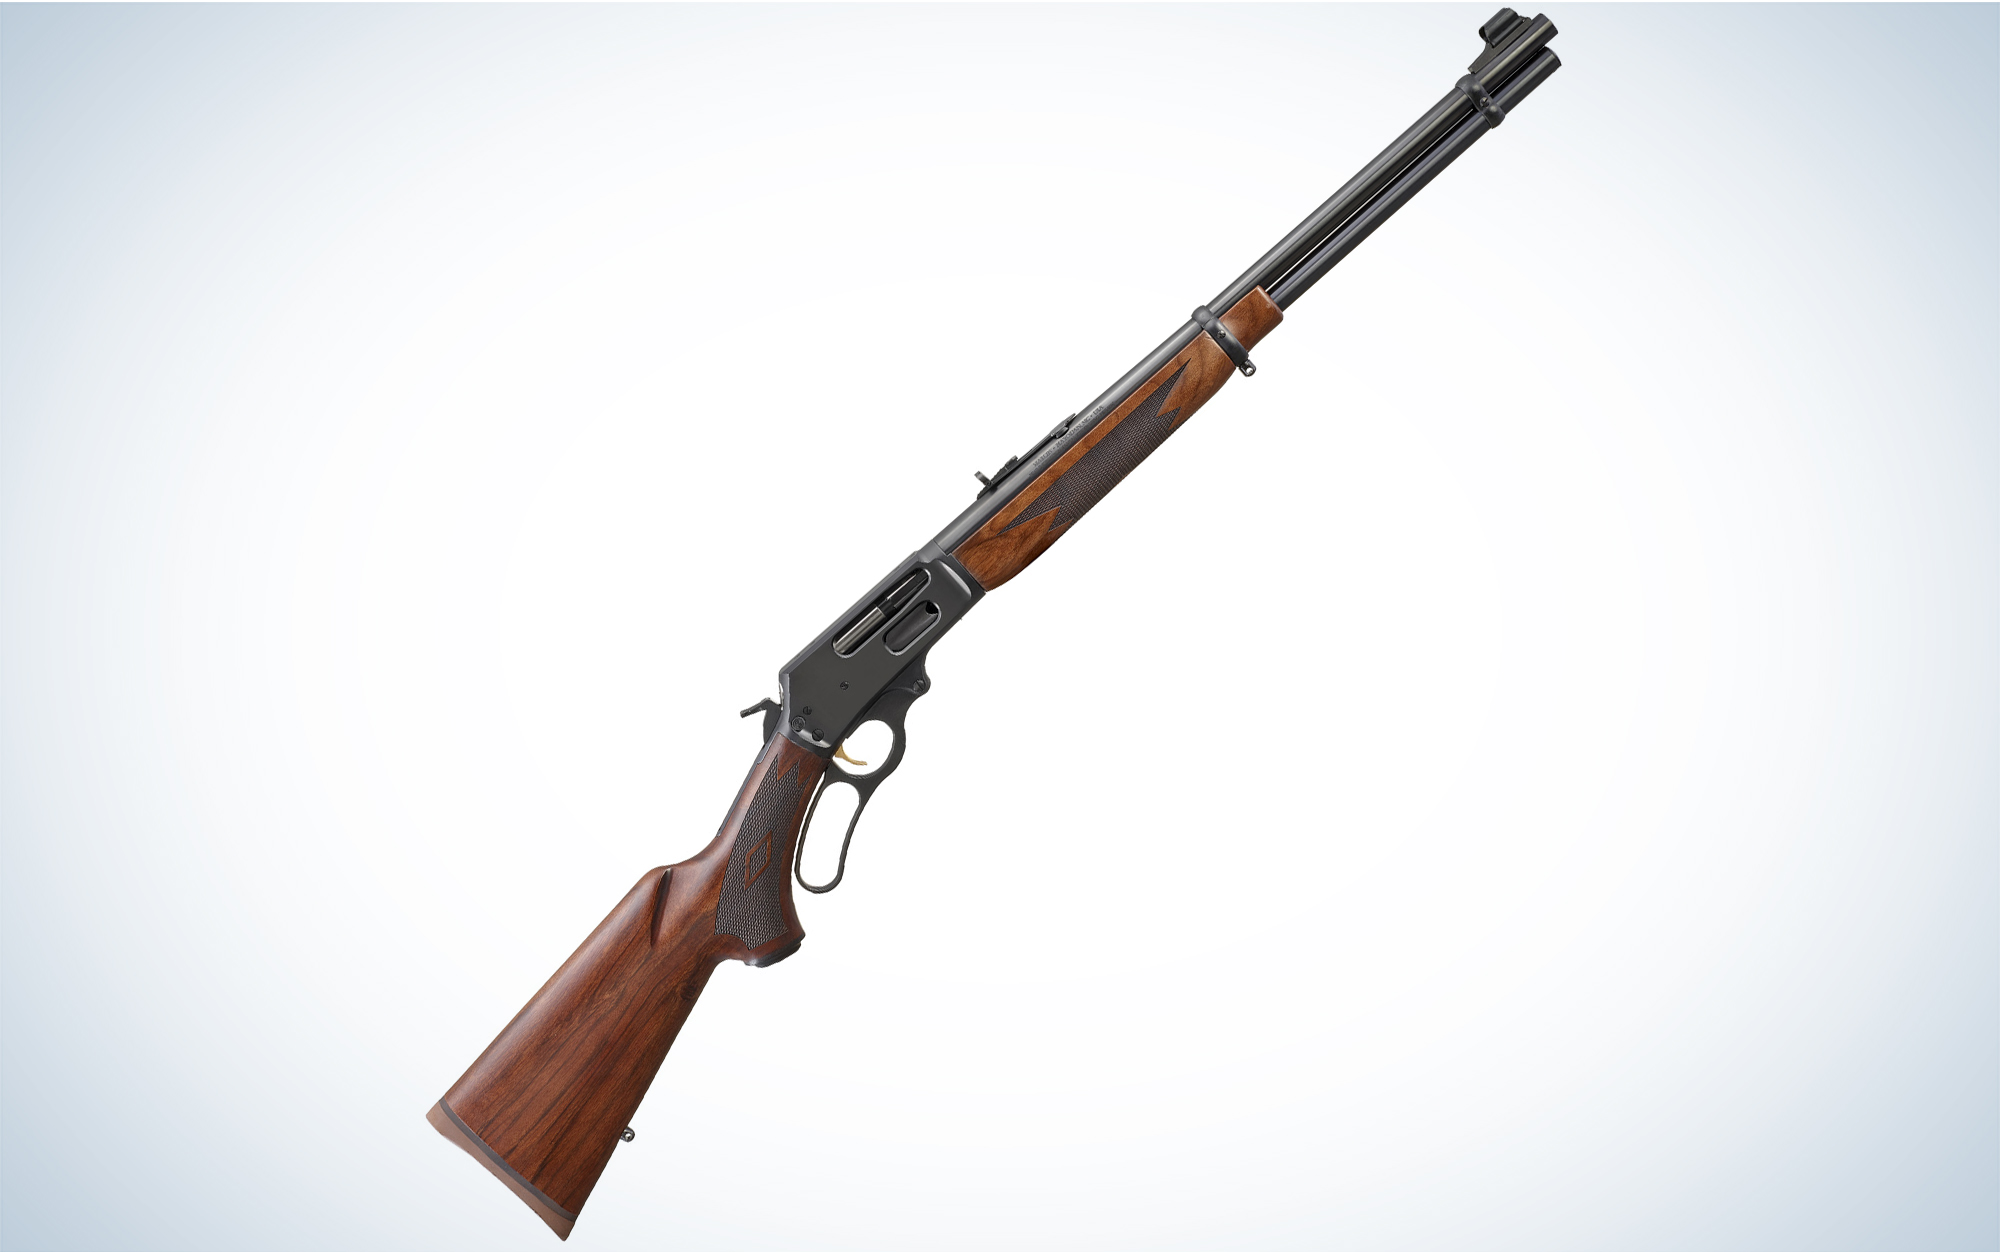 The Marlin 336 Classic is one of the best guns for hog hunting.